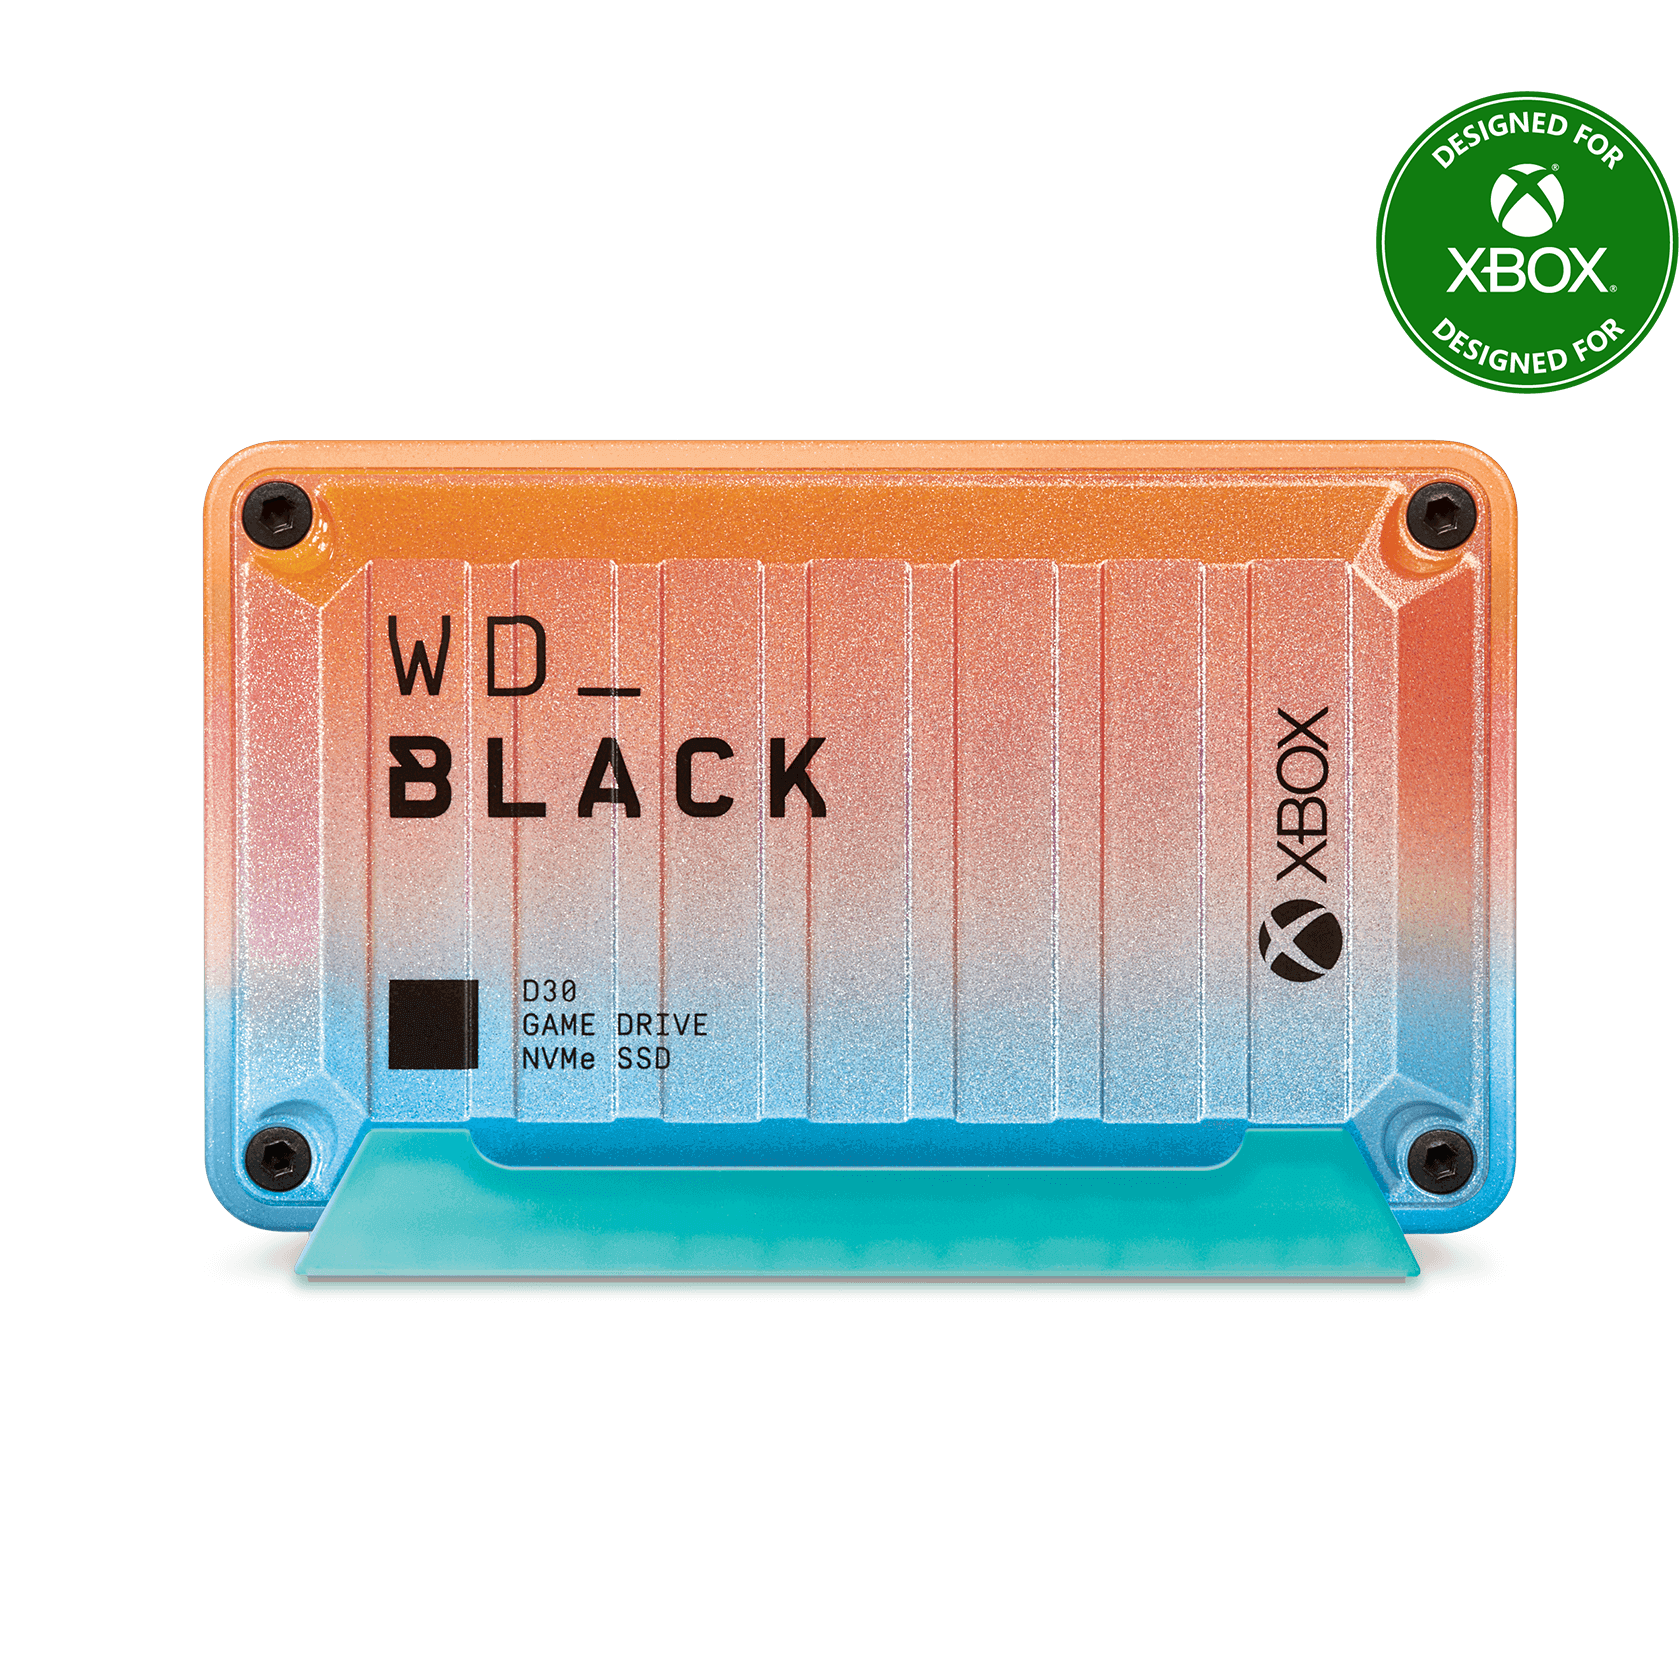 WD_BLACK D30 Game Drive SSD for Xbox™ – Limited Edition Summer Collection